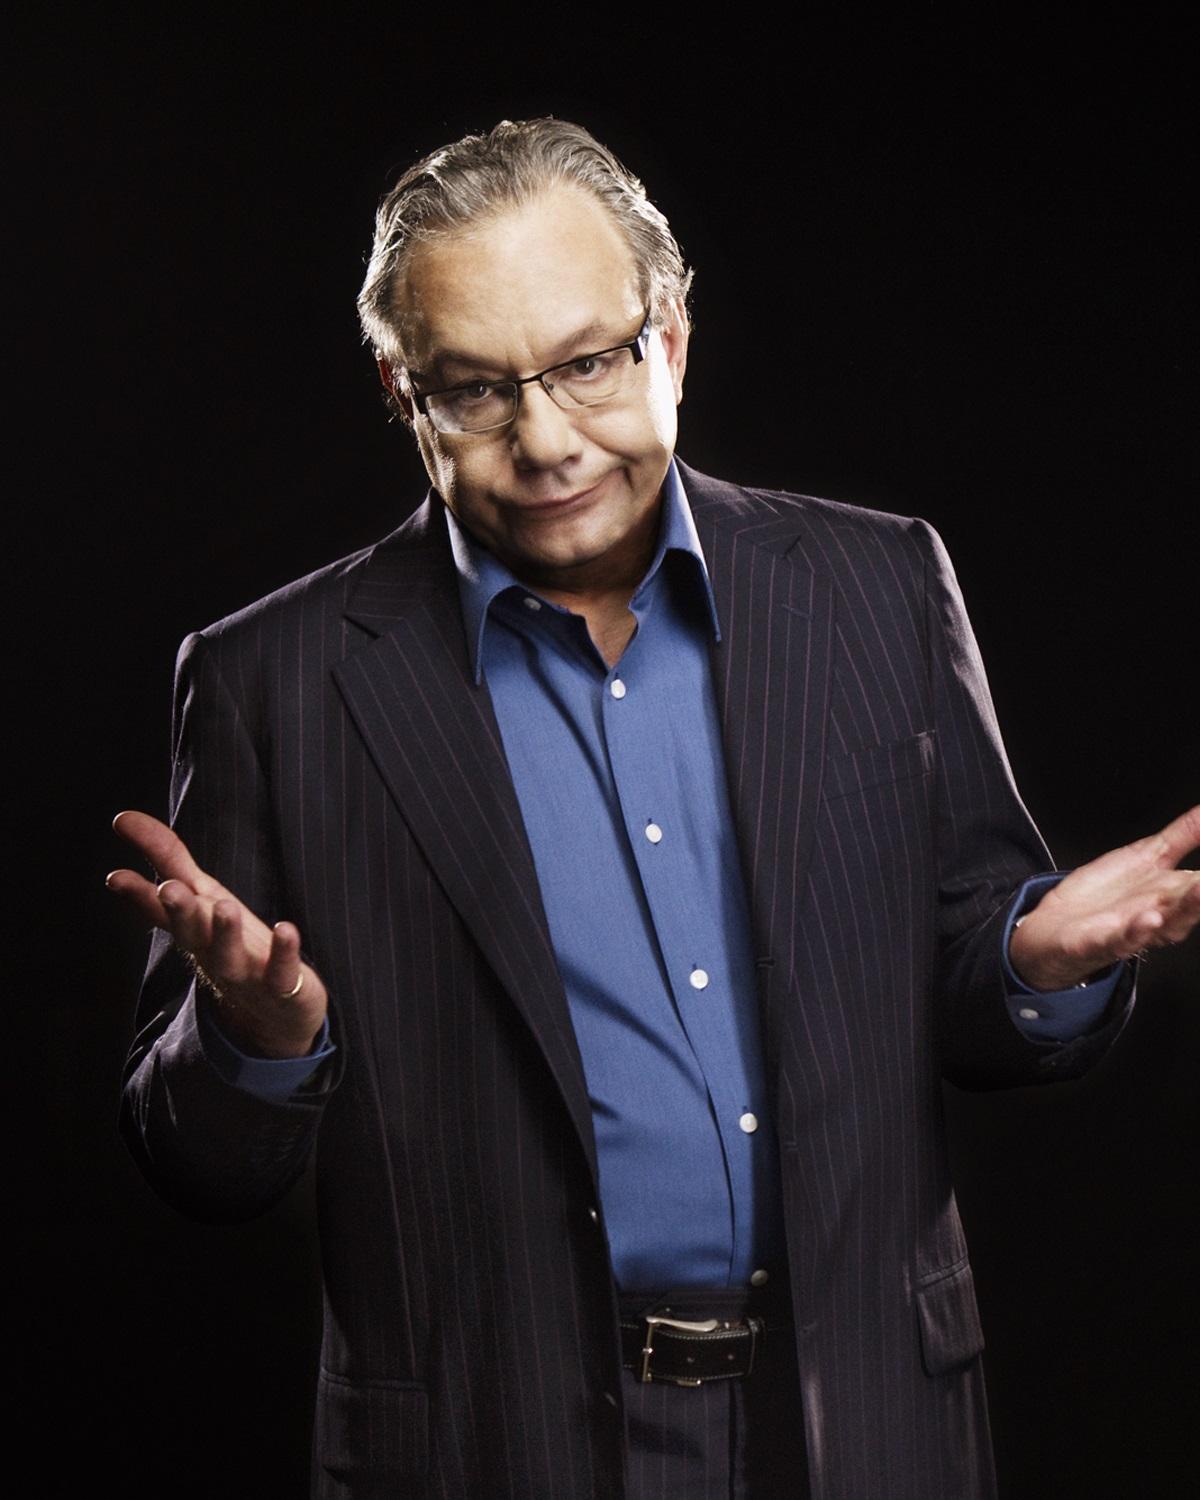 Lewis Black, GOING TO HELL! with the most optimistic man in the room